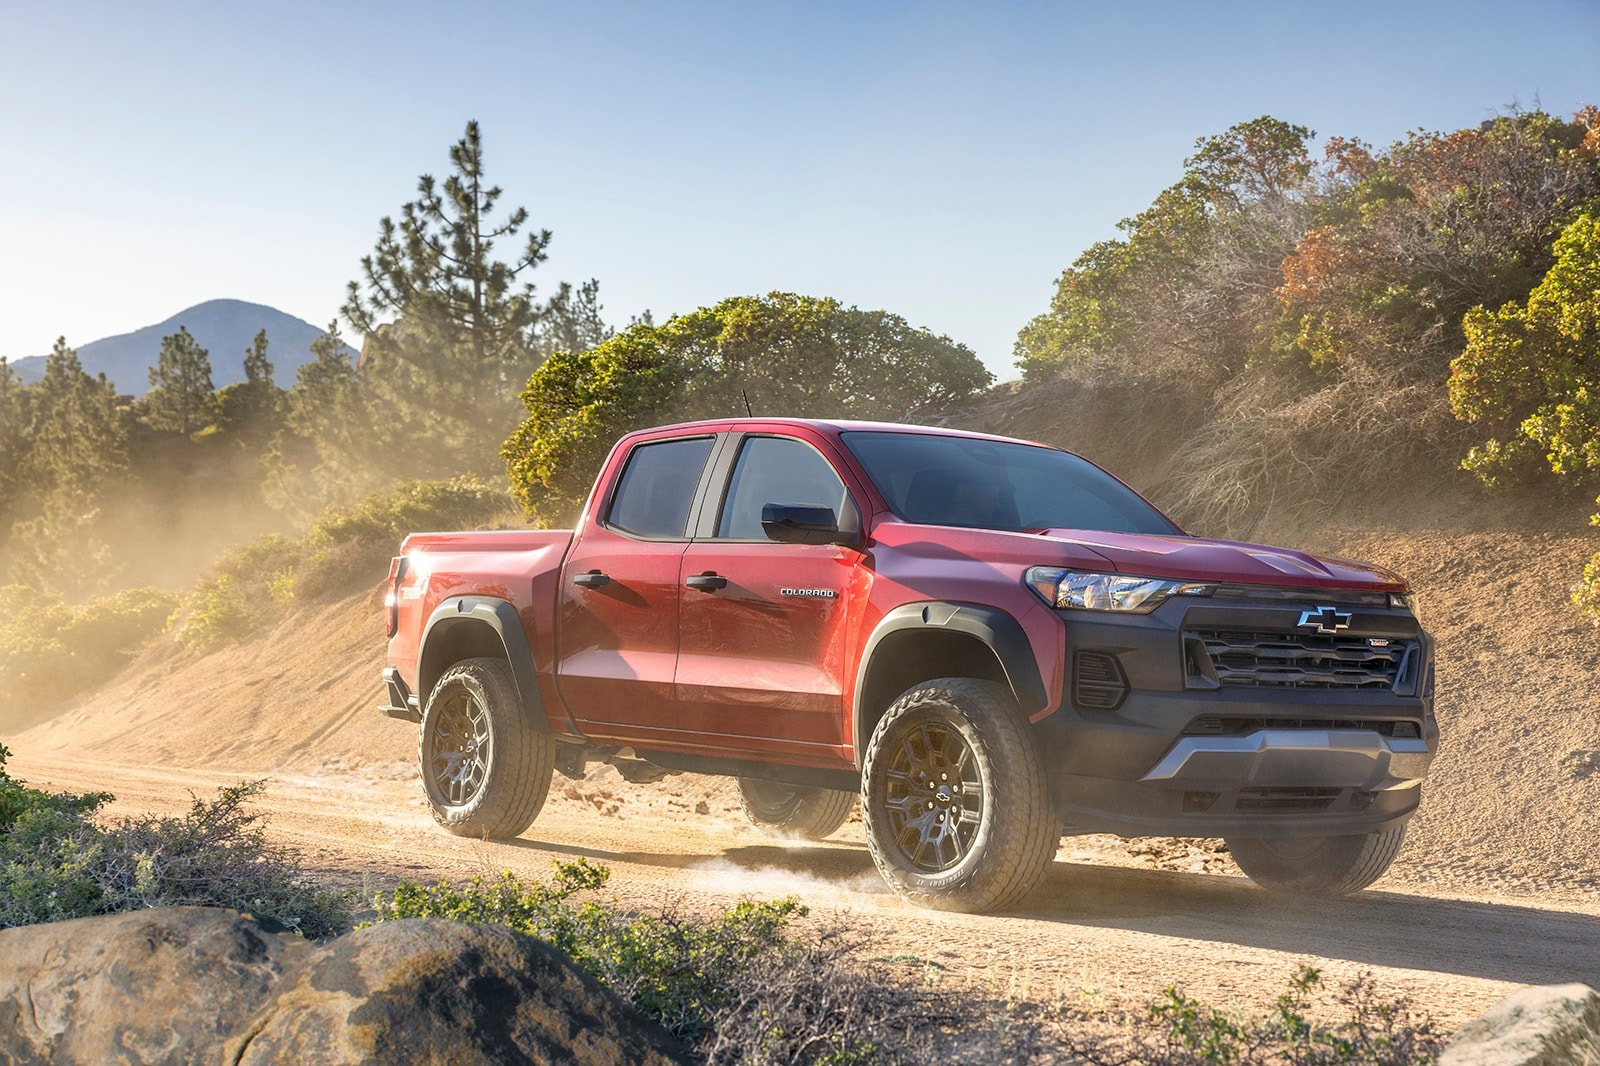 2023 Chevrolet Colorado Debuts With Sharp New Looks, Improved Cabin